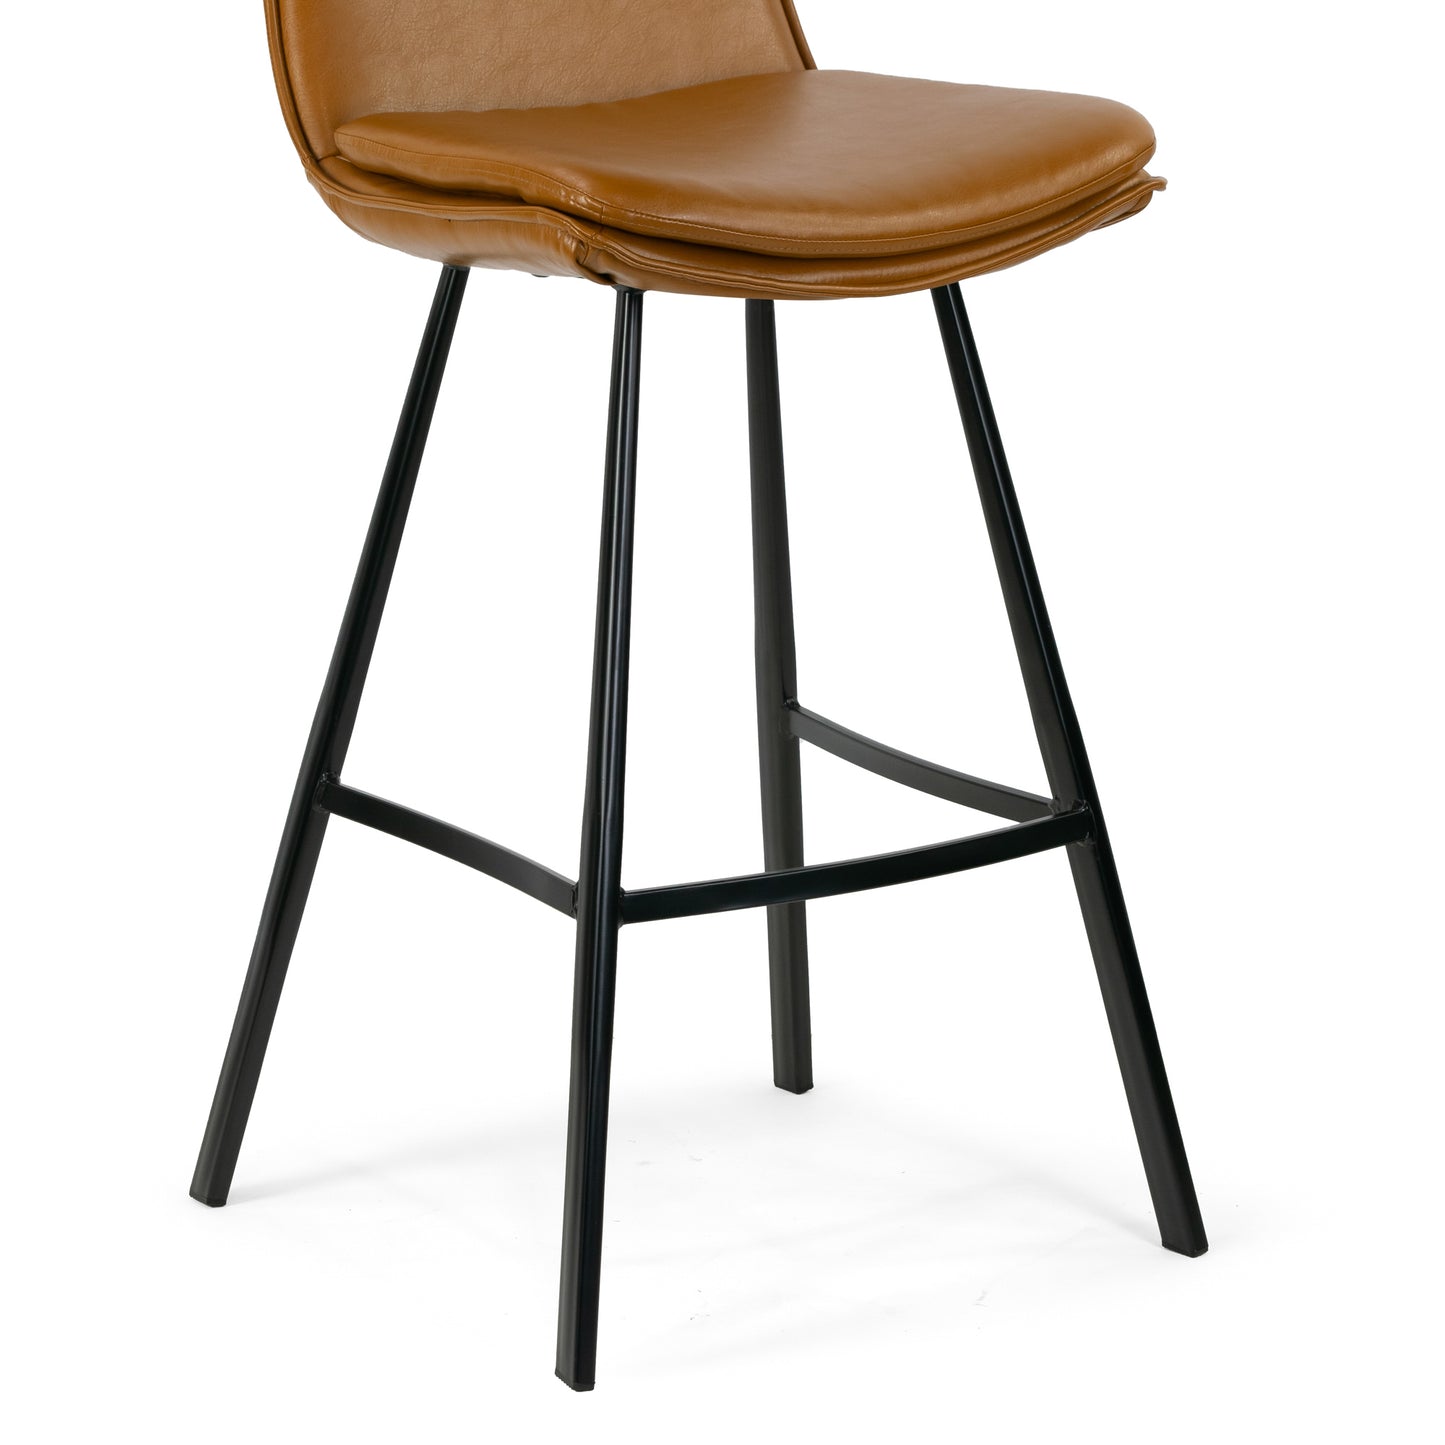 Set of 2 Avalyn Cappuccino Faux Leather Bar Stool with Black Metal Legs